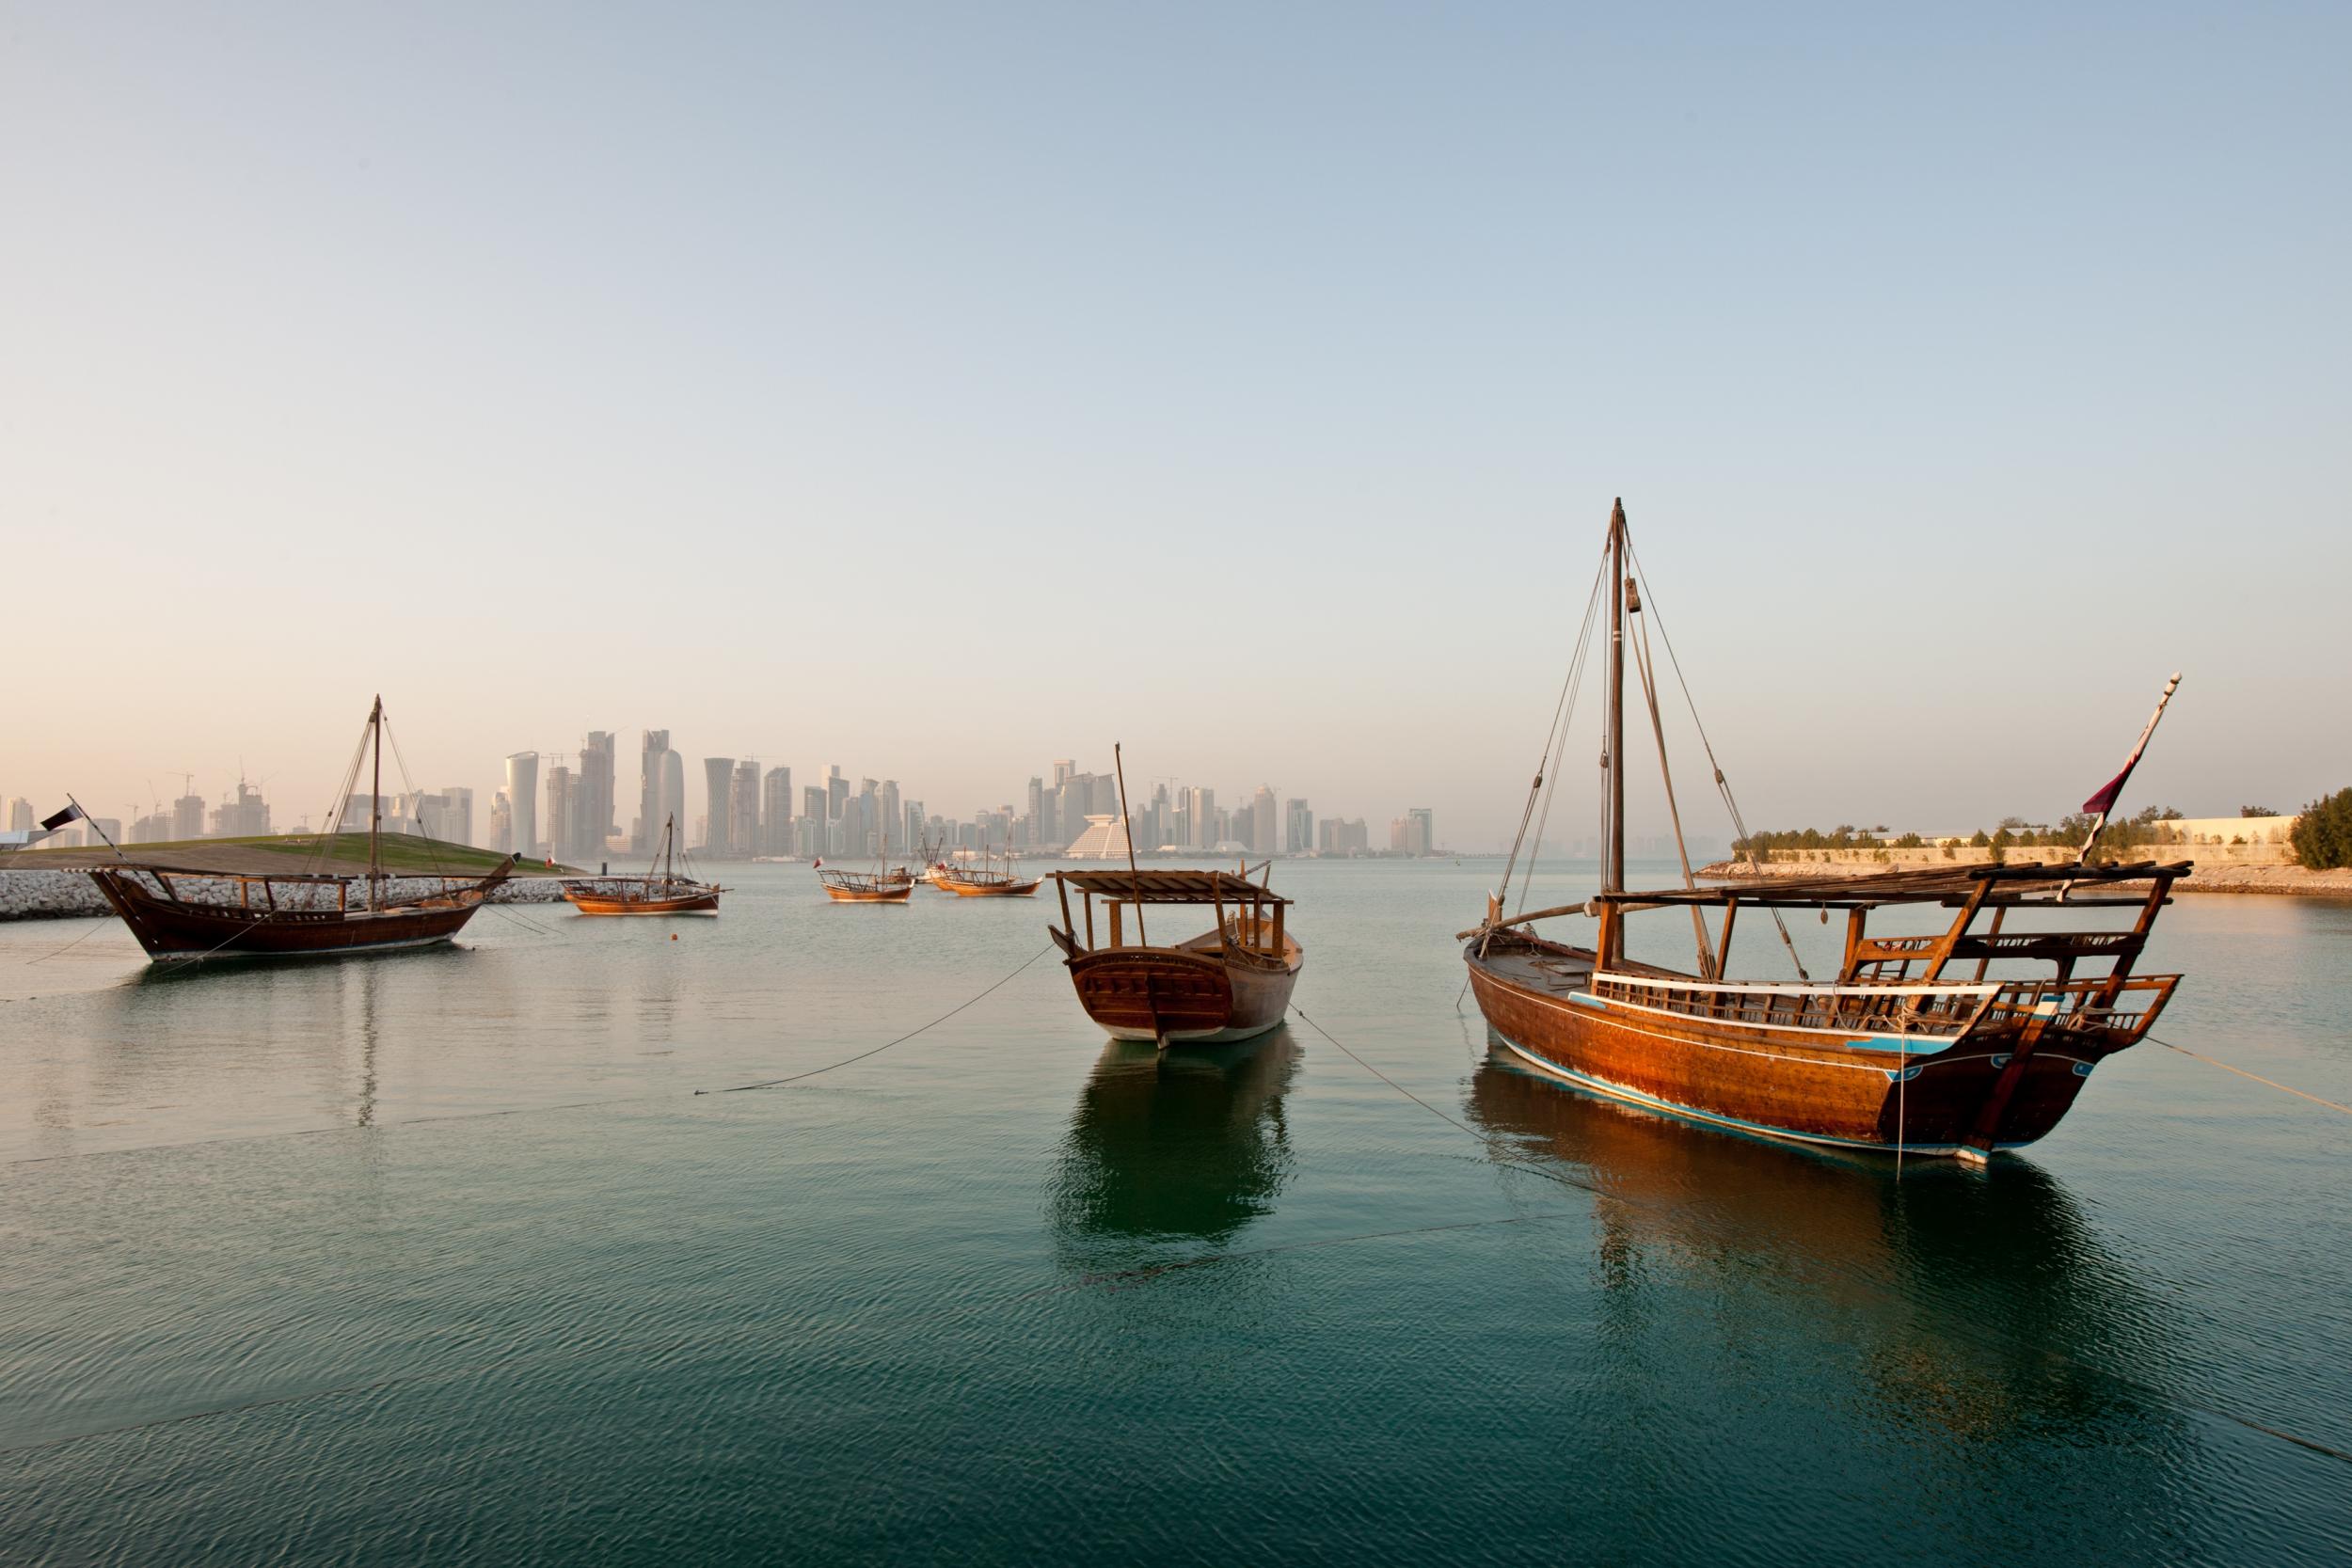 Take a traditional dhow cruise